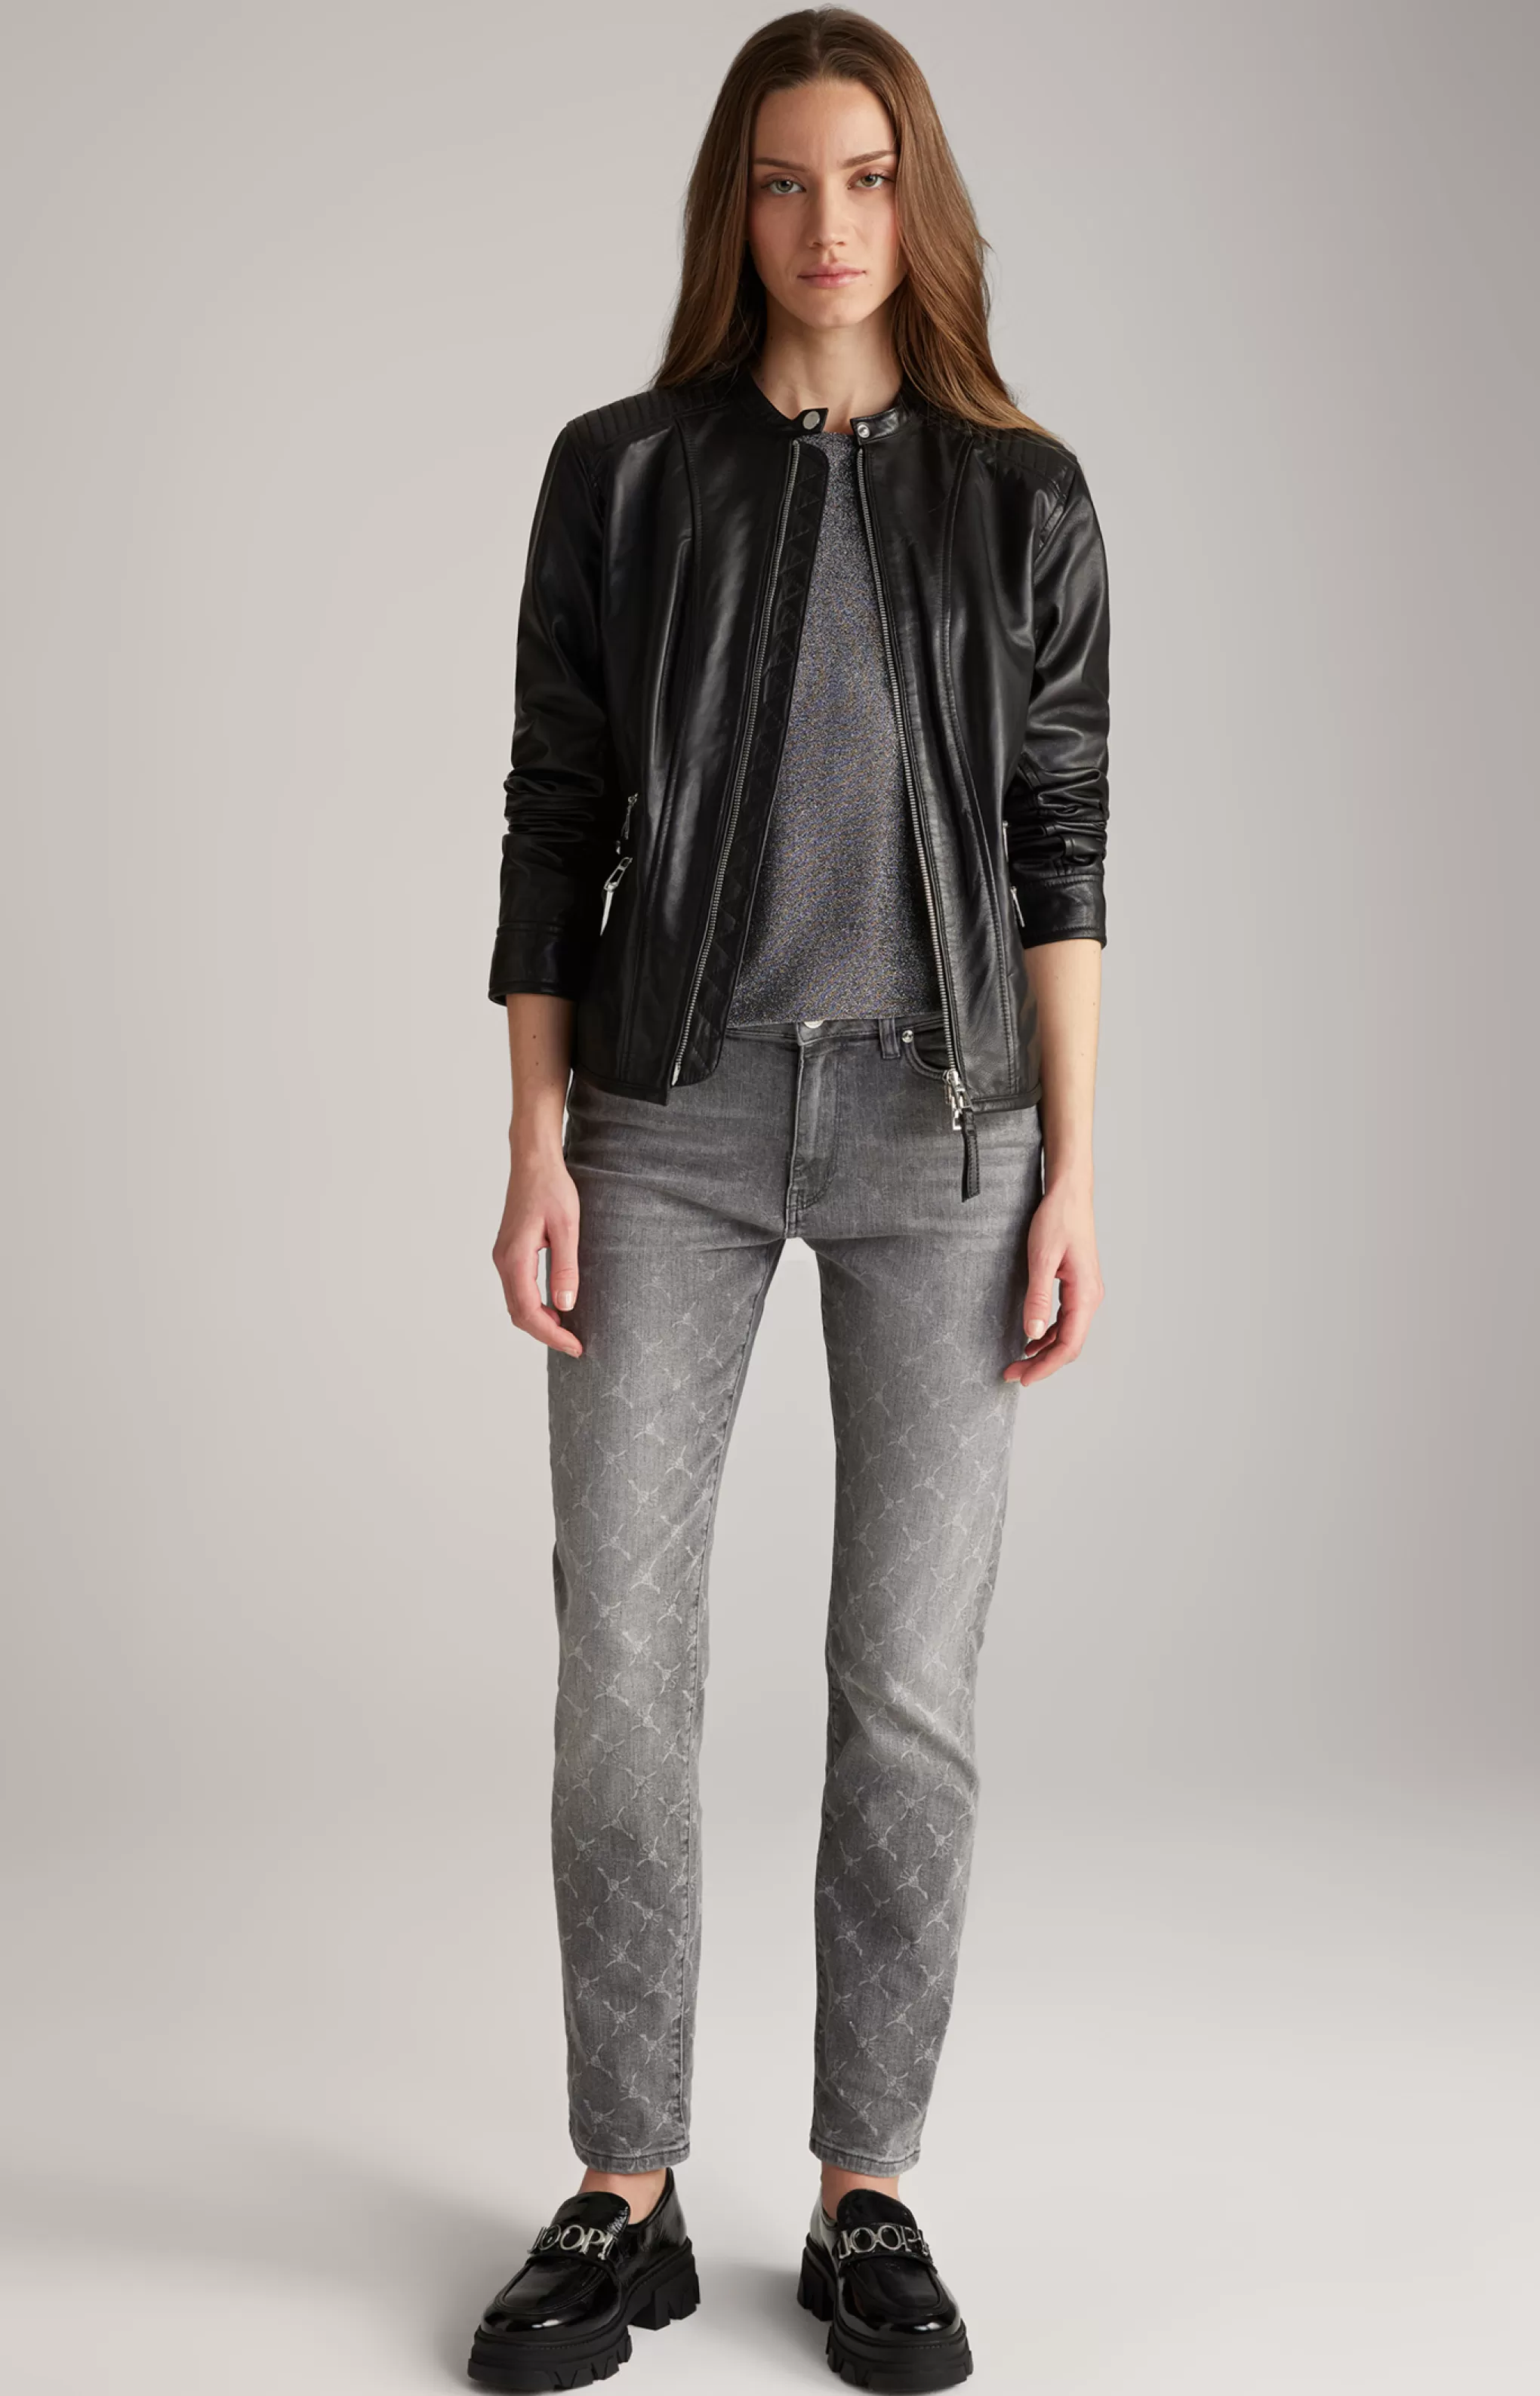 Jeans | Clothing*JOOP Jeans | Clothing Cornflower Jeans in a Light Grey Washed Finish